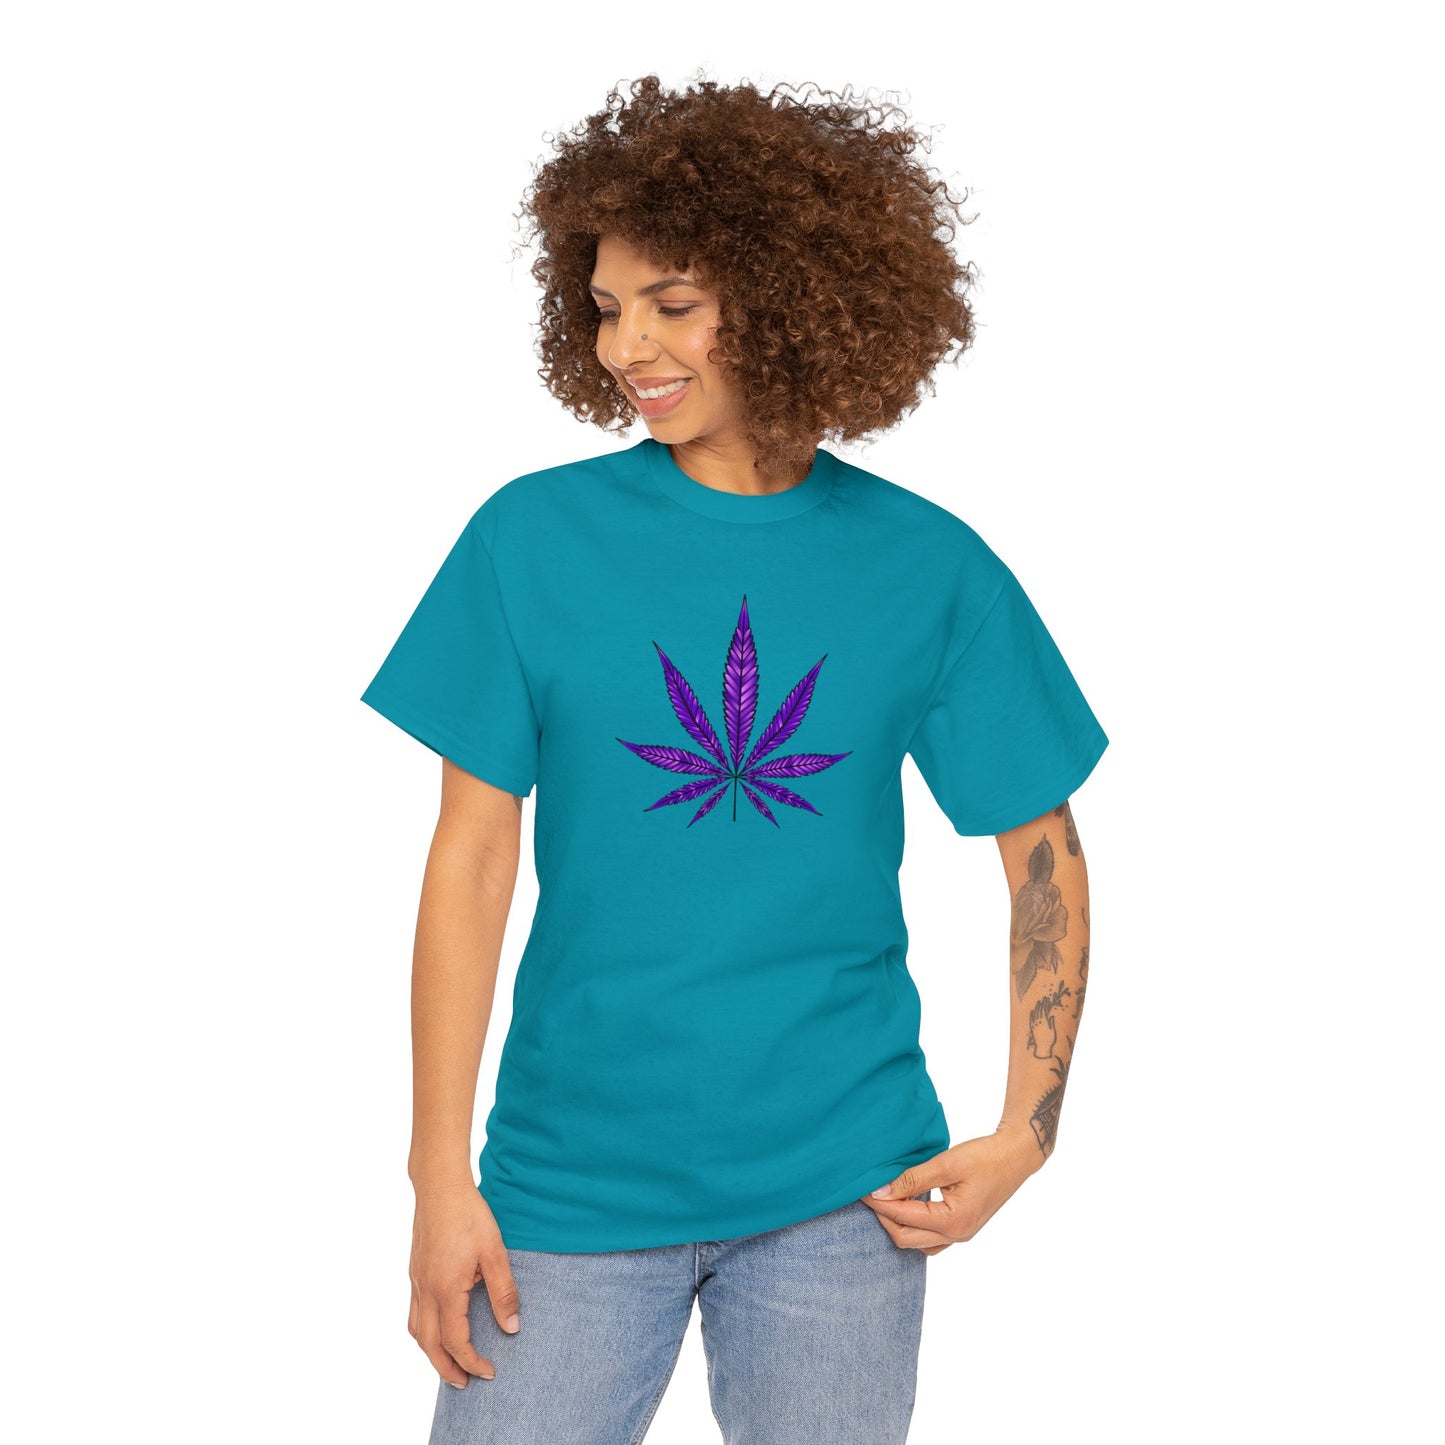 A woman wearing a vibrant color teal t-shirt with a Purple Cannabis Leaf Tee design on the front, representing marijuana culture.